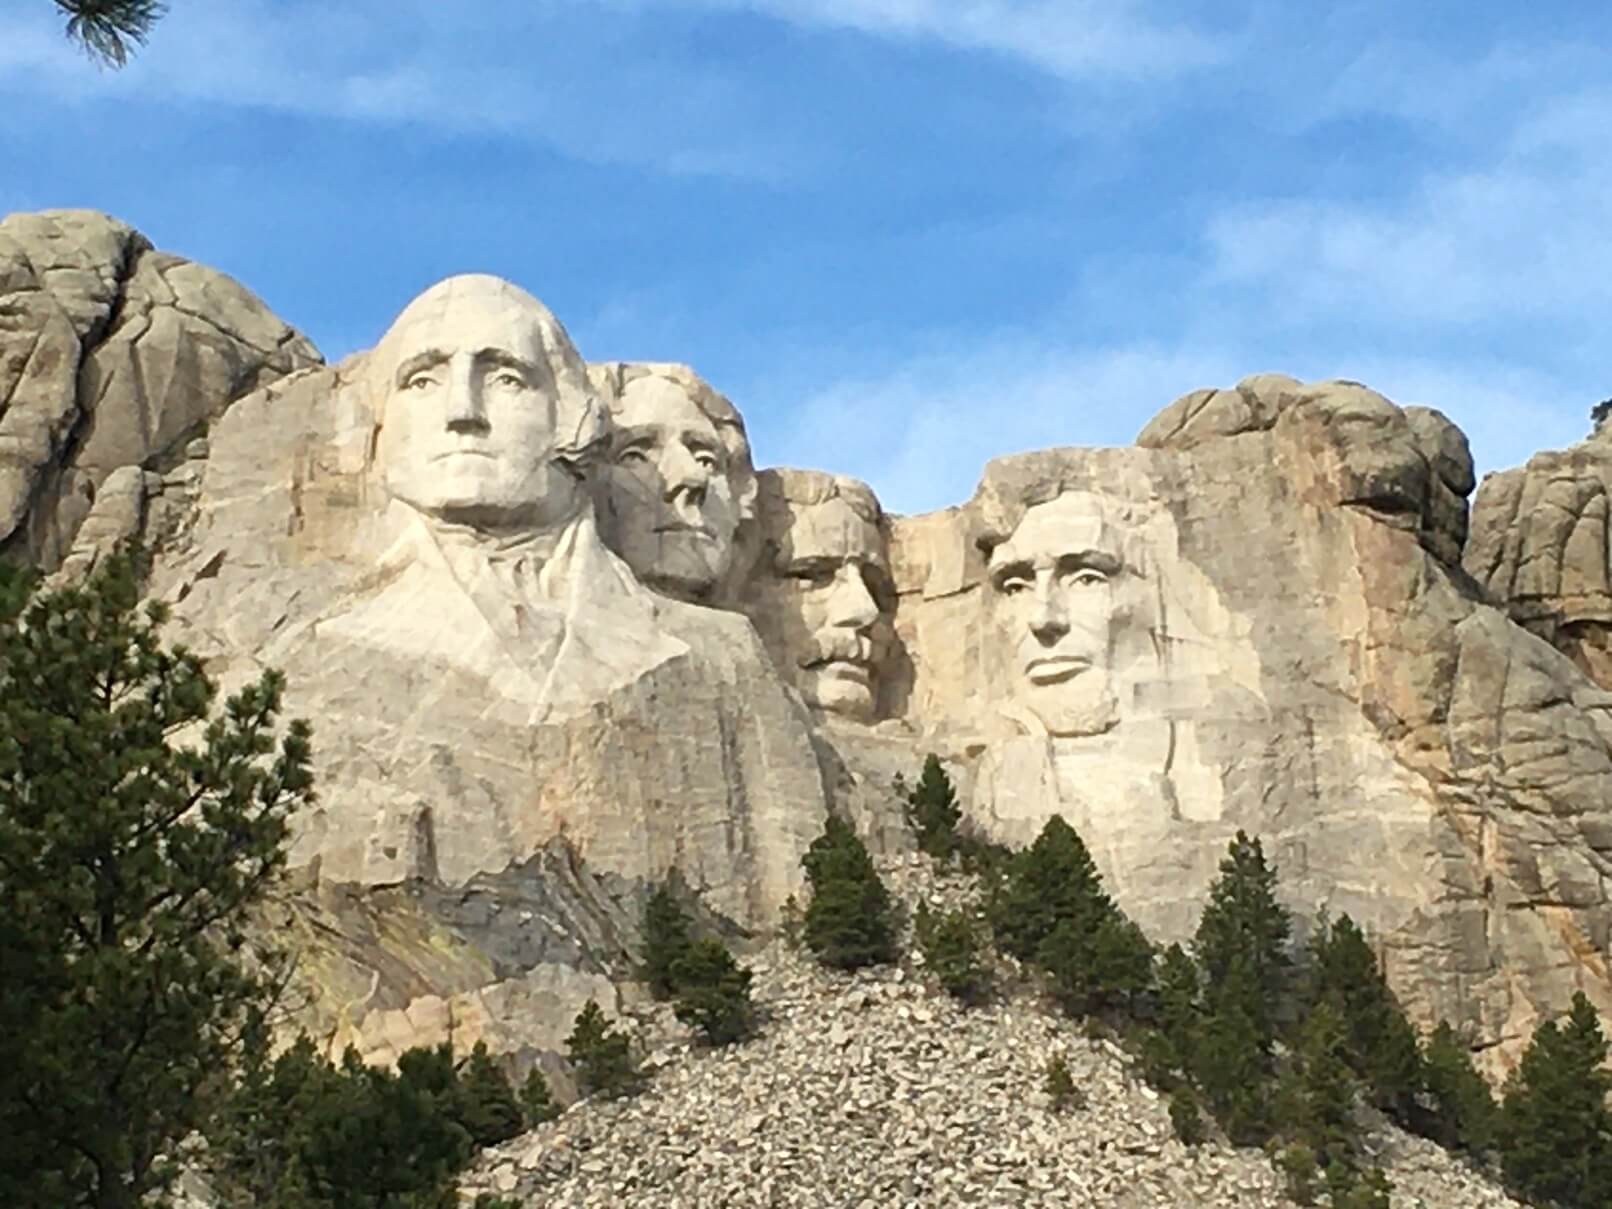 Visits to Mount Rushmore, Custer State Park, and Devils Tower